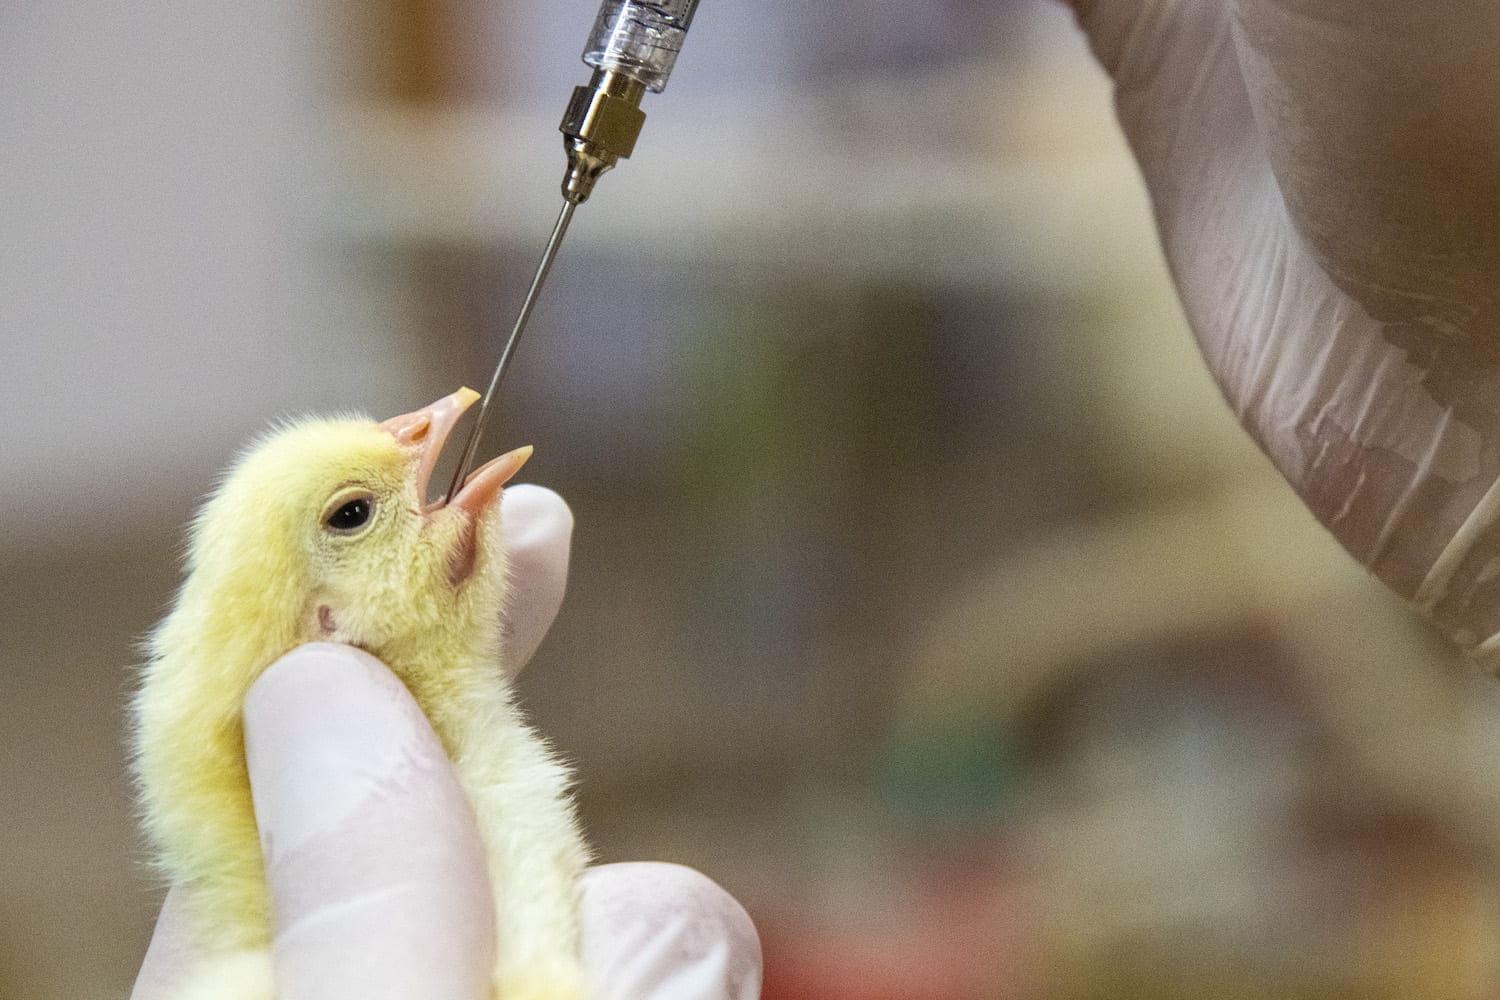 Poultry Vaccine Market: Growing Demand for Animal Health and Welfare Drives the Market